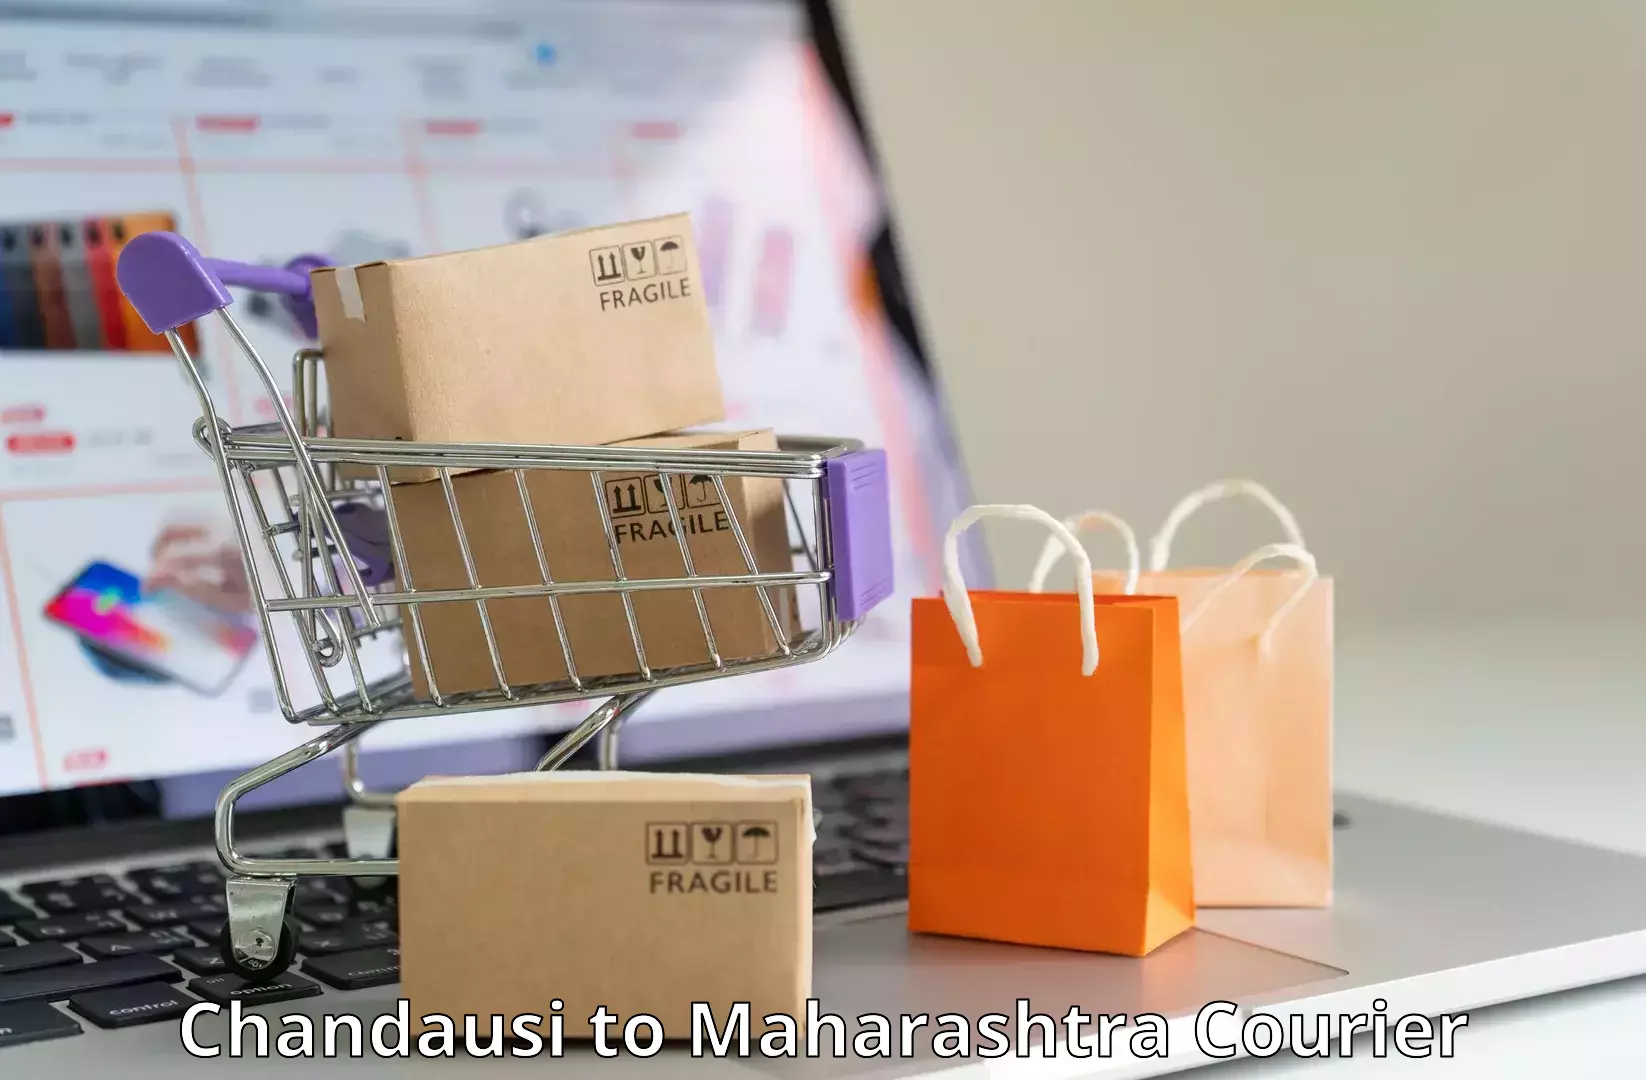 User-friendly delivery service Chandausi to Parner